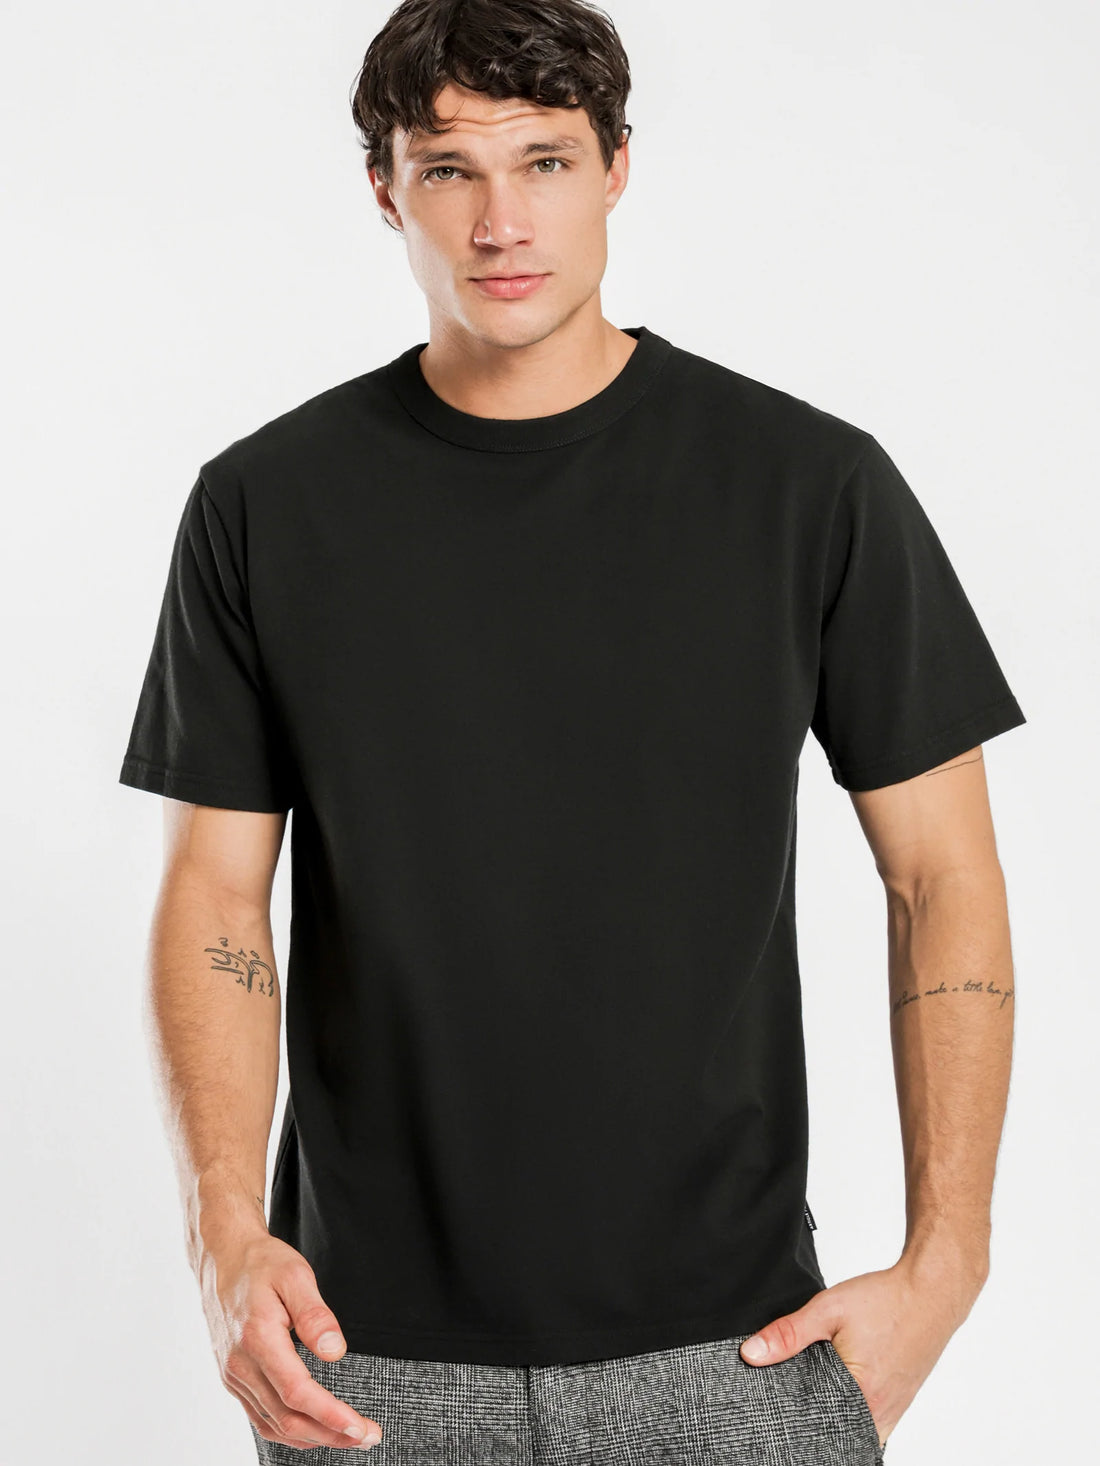 Trends of Heavy T-shirts?